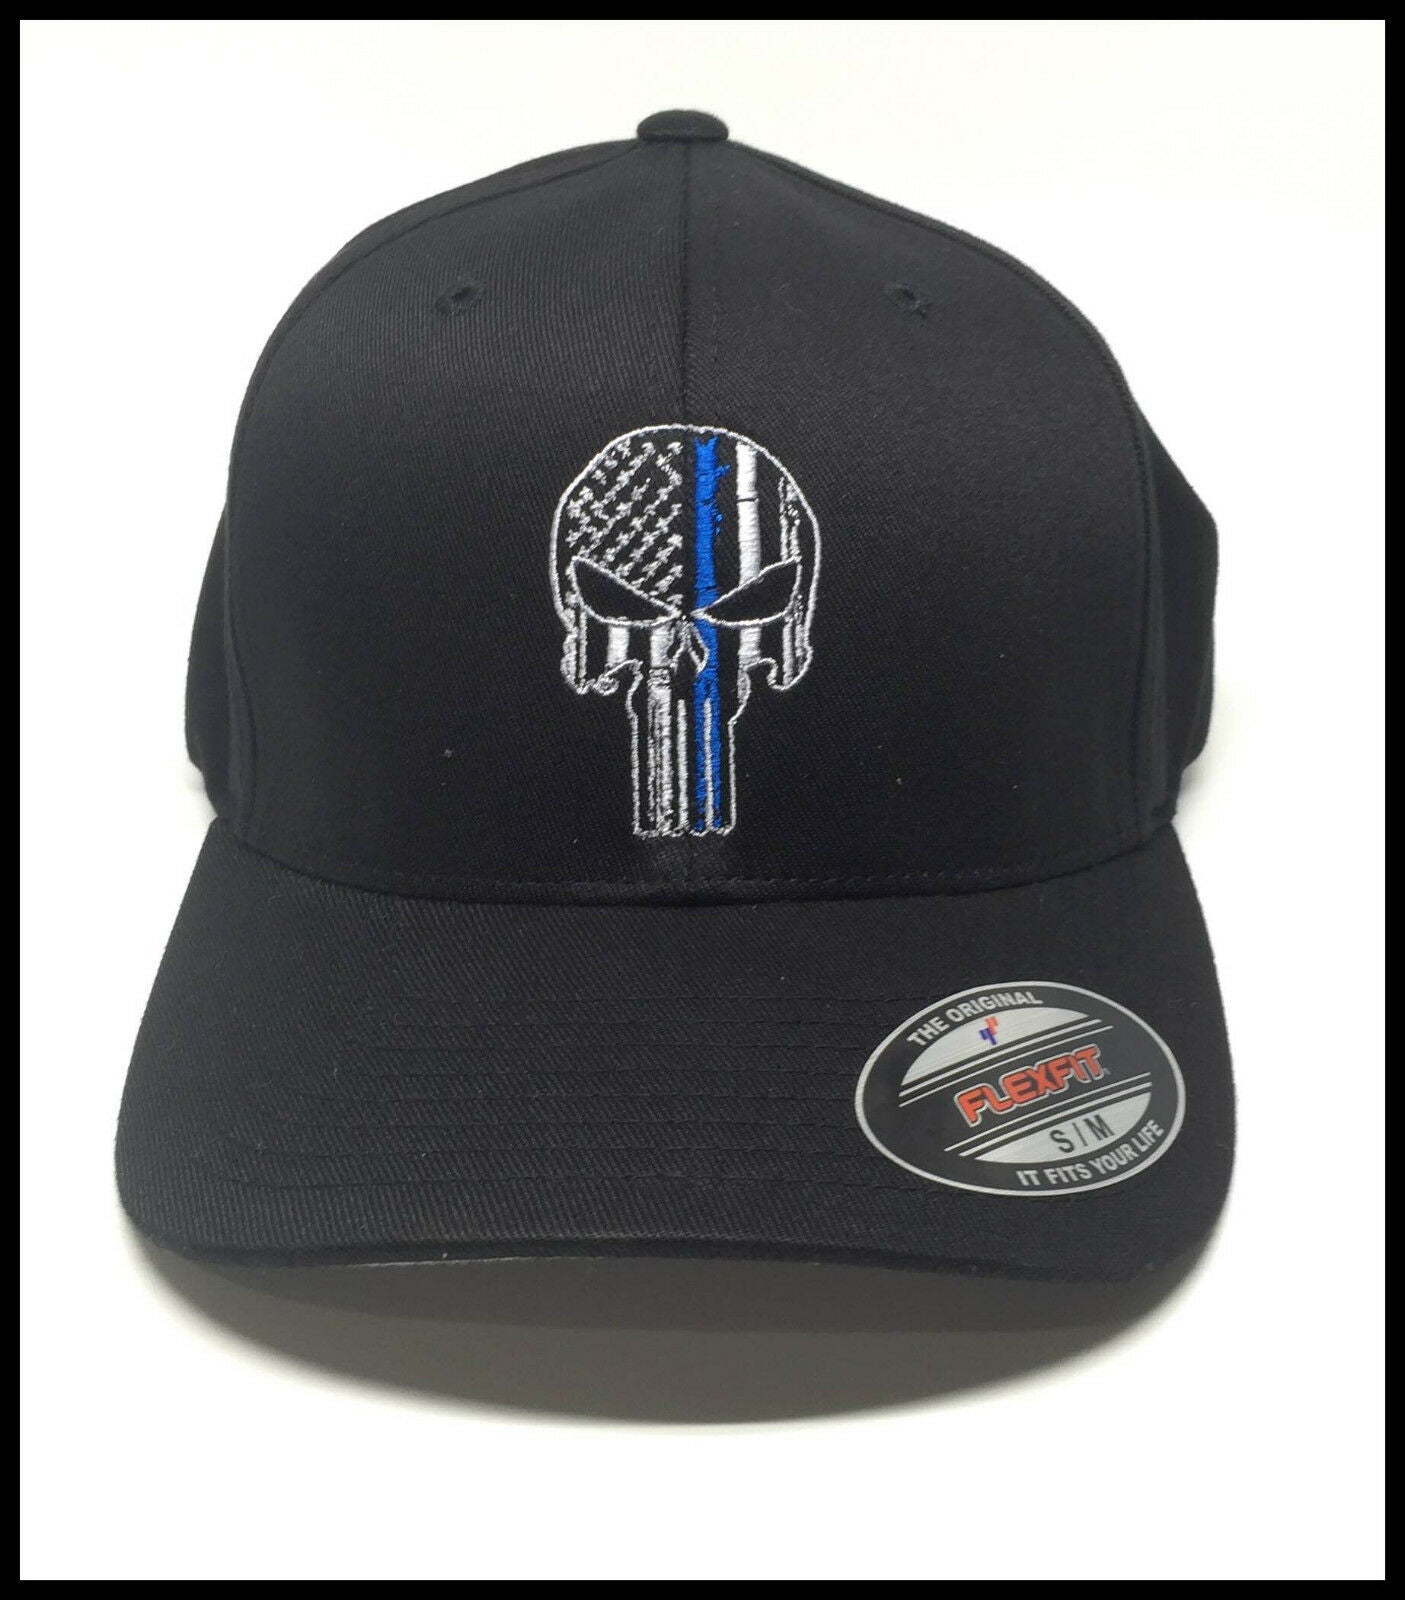 Thin blue Line Punisher Flex Fit Ball Cap hat Police, Various Sizes Free Ship - Powercall Sirens LLC